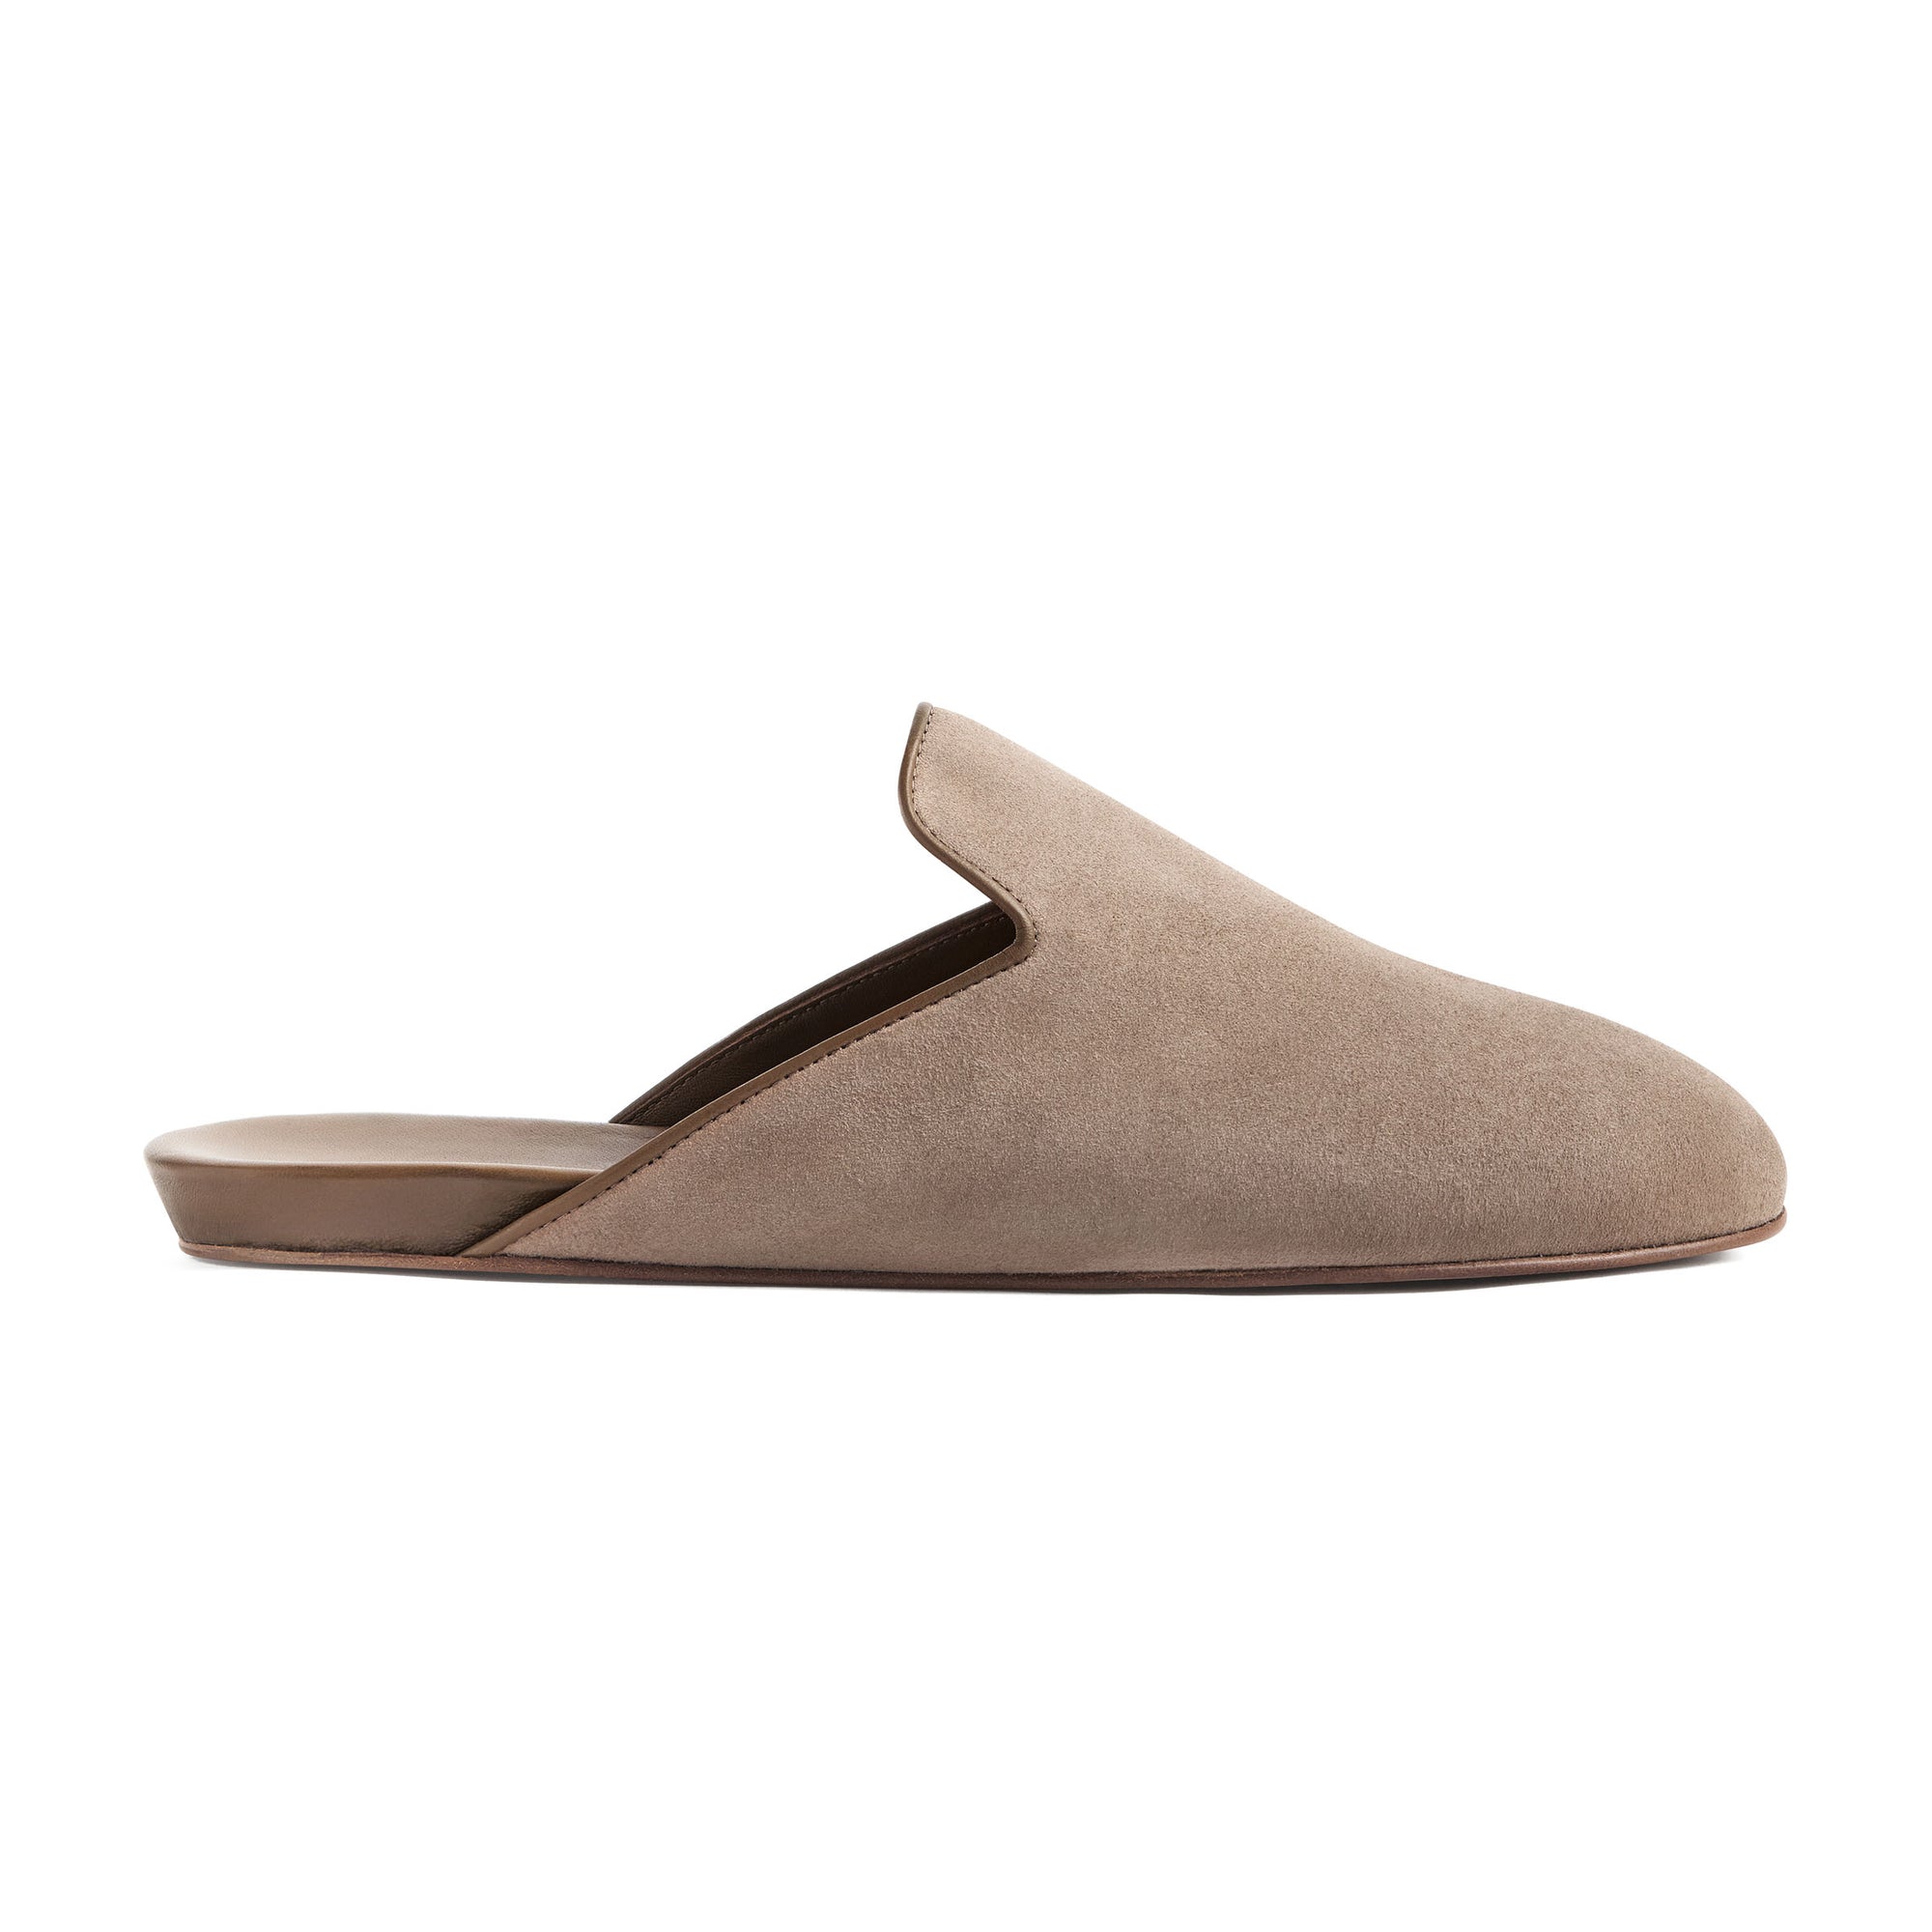 Inabo Men's Fritz slipper in taupe suede in profile